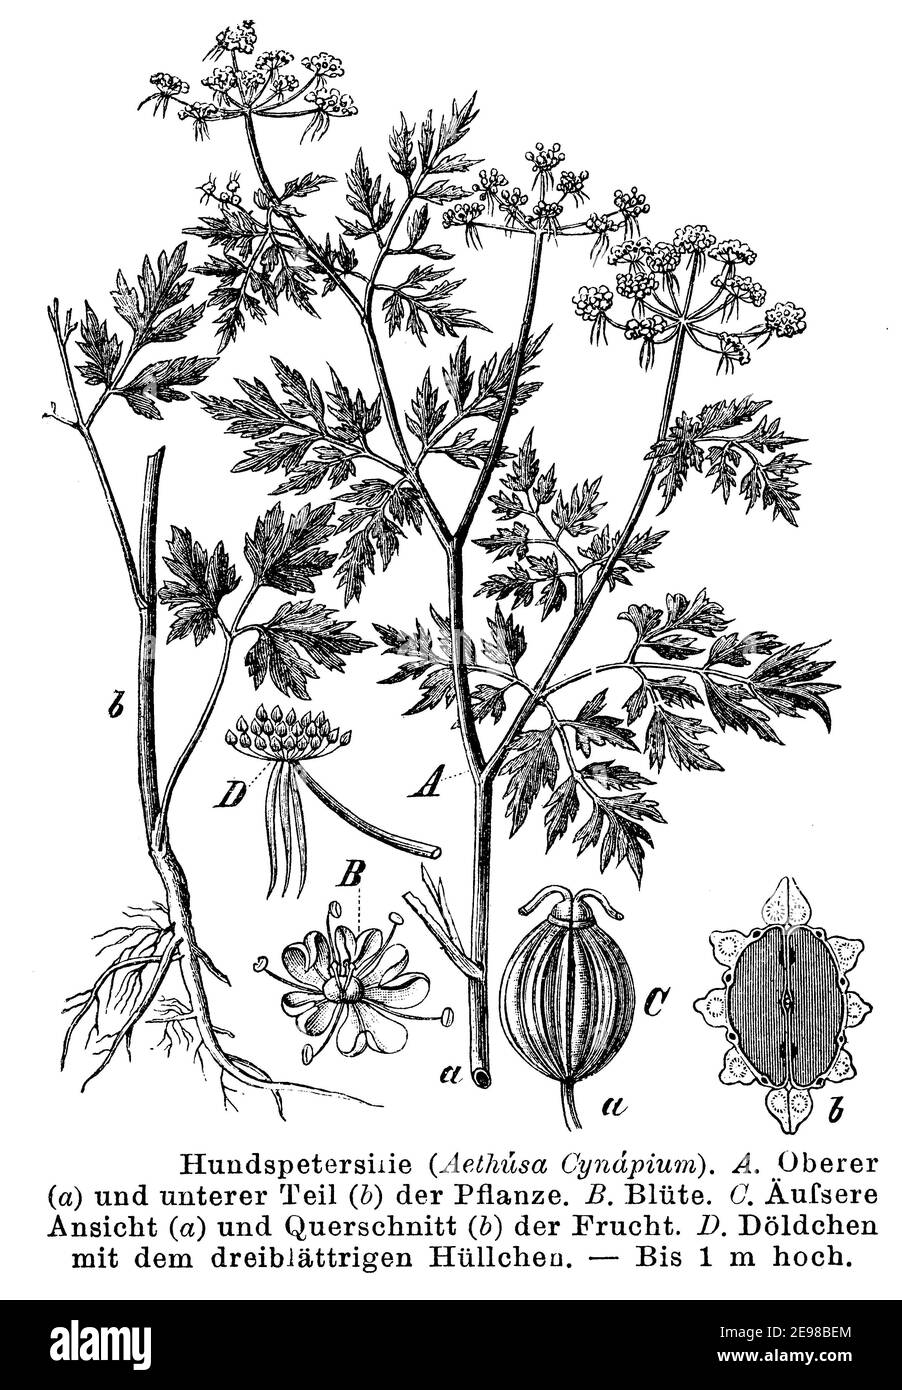 Narr's Petersilie, Narr's cicely, or poison Petersilie / Aethusa cynapium / Hundspetersilie (Botanik Buch, 1892) Stockfoto